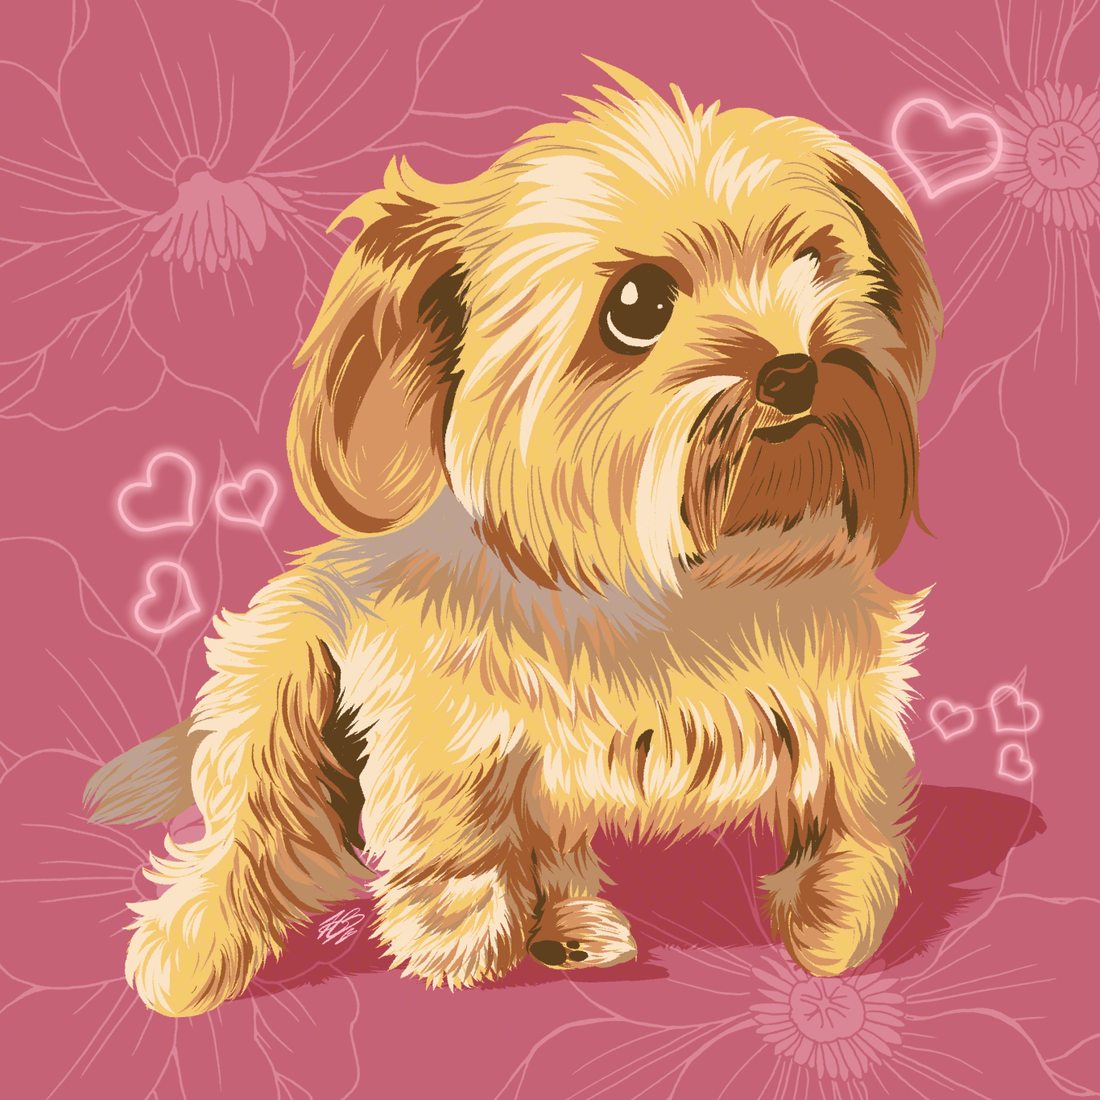 Digital painting of my old dog Flint, a Yorkshire Terrier. He's sitting sideways and looking to the right side. The background is a dusky pink with flowers. Small pink hearts surround him.